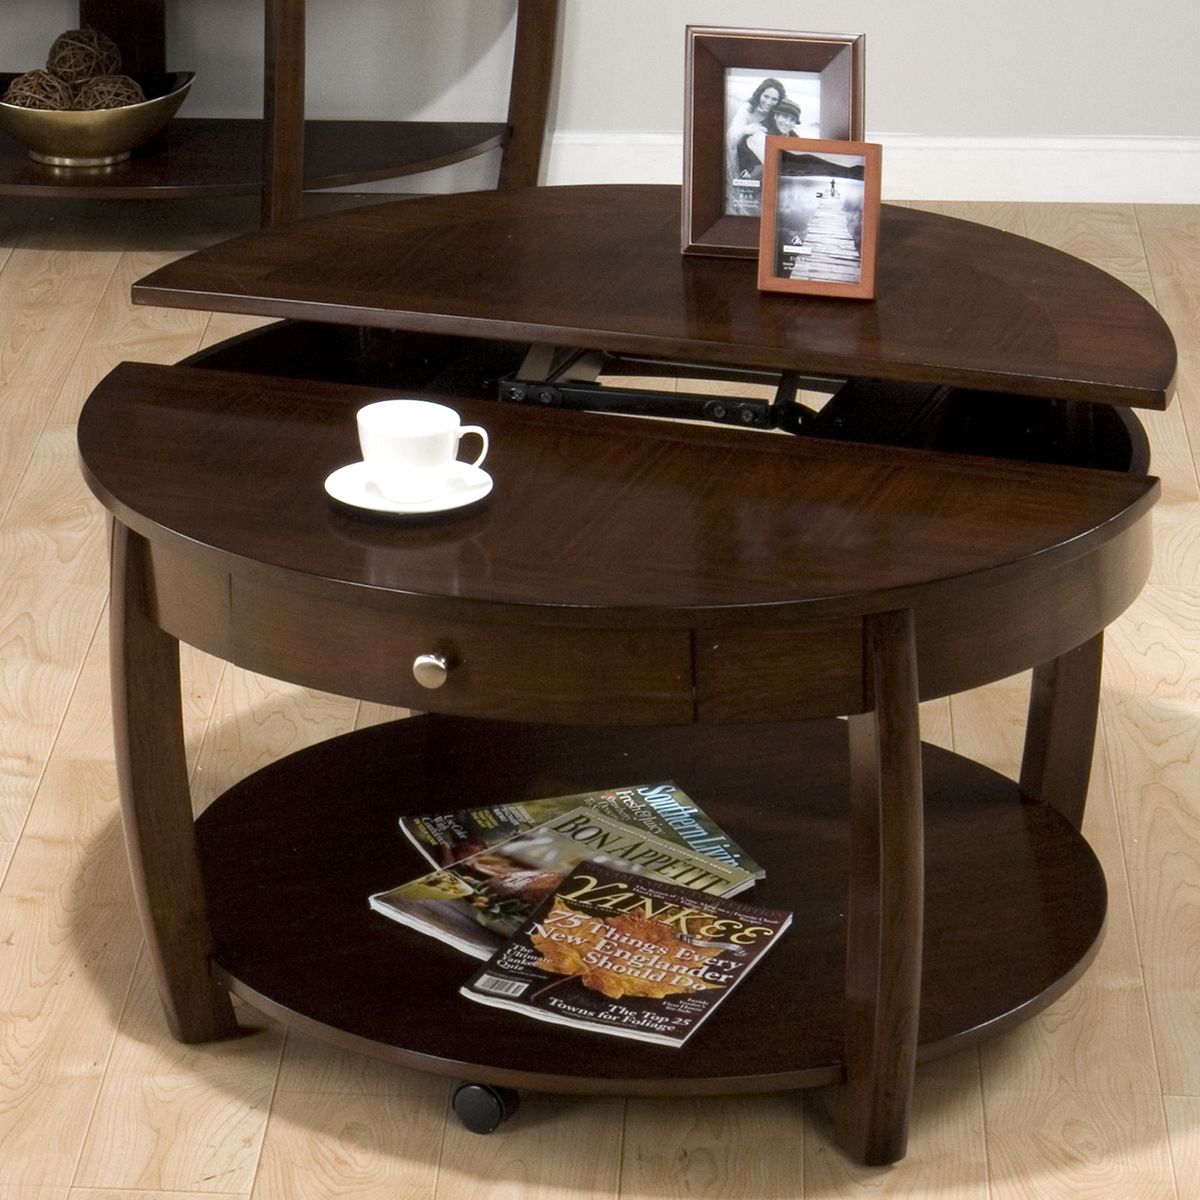 The Round Coffee Tables With Storage – The Simple And Compact Furniture Within Round Coffee Tables (Gallery 5 of 20)